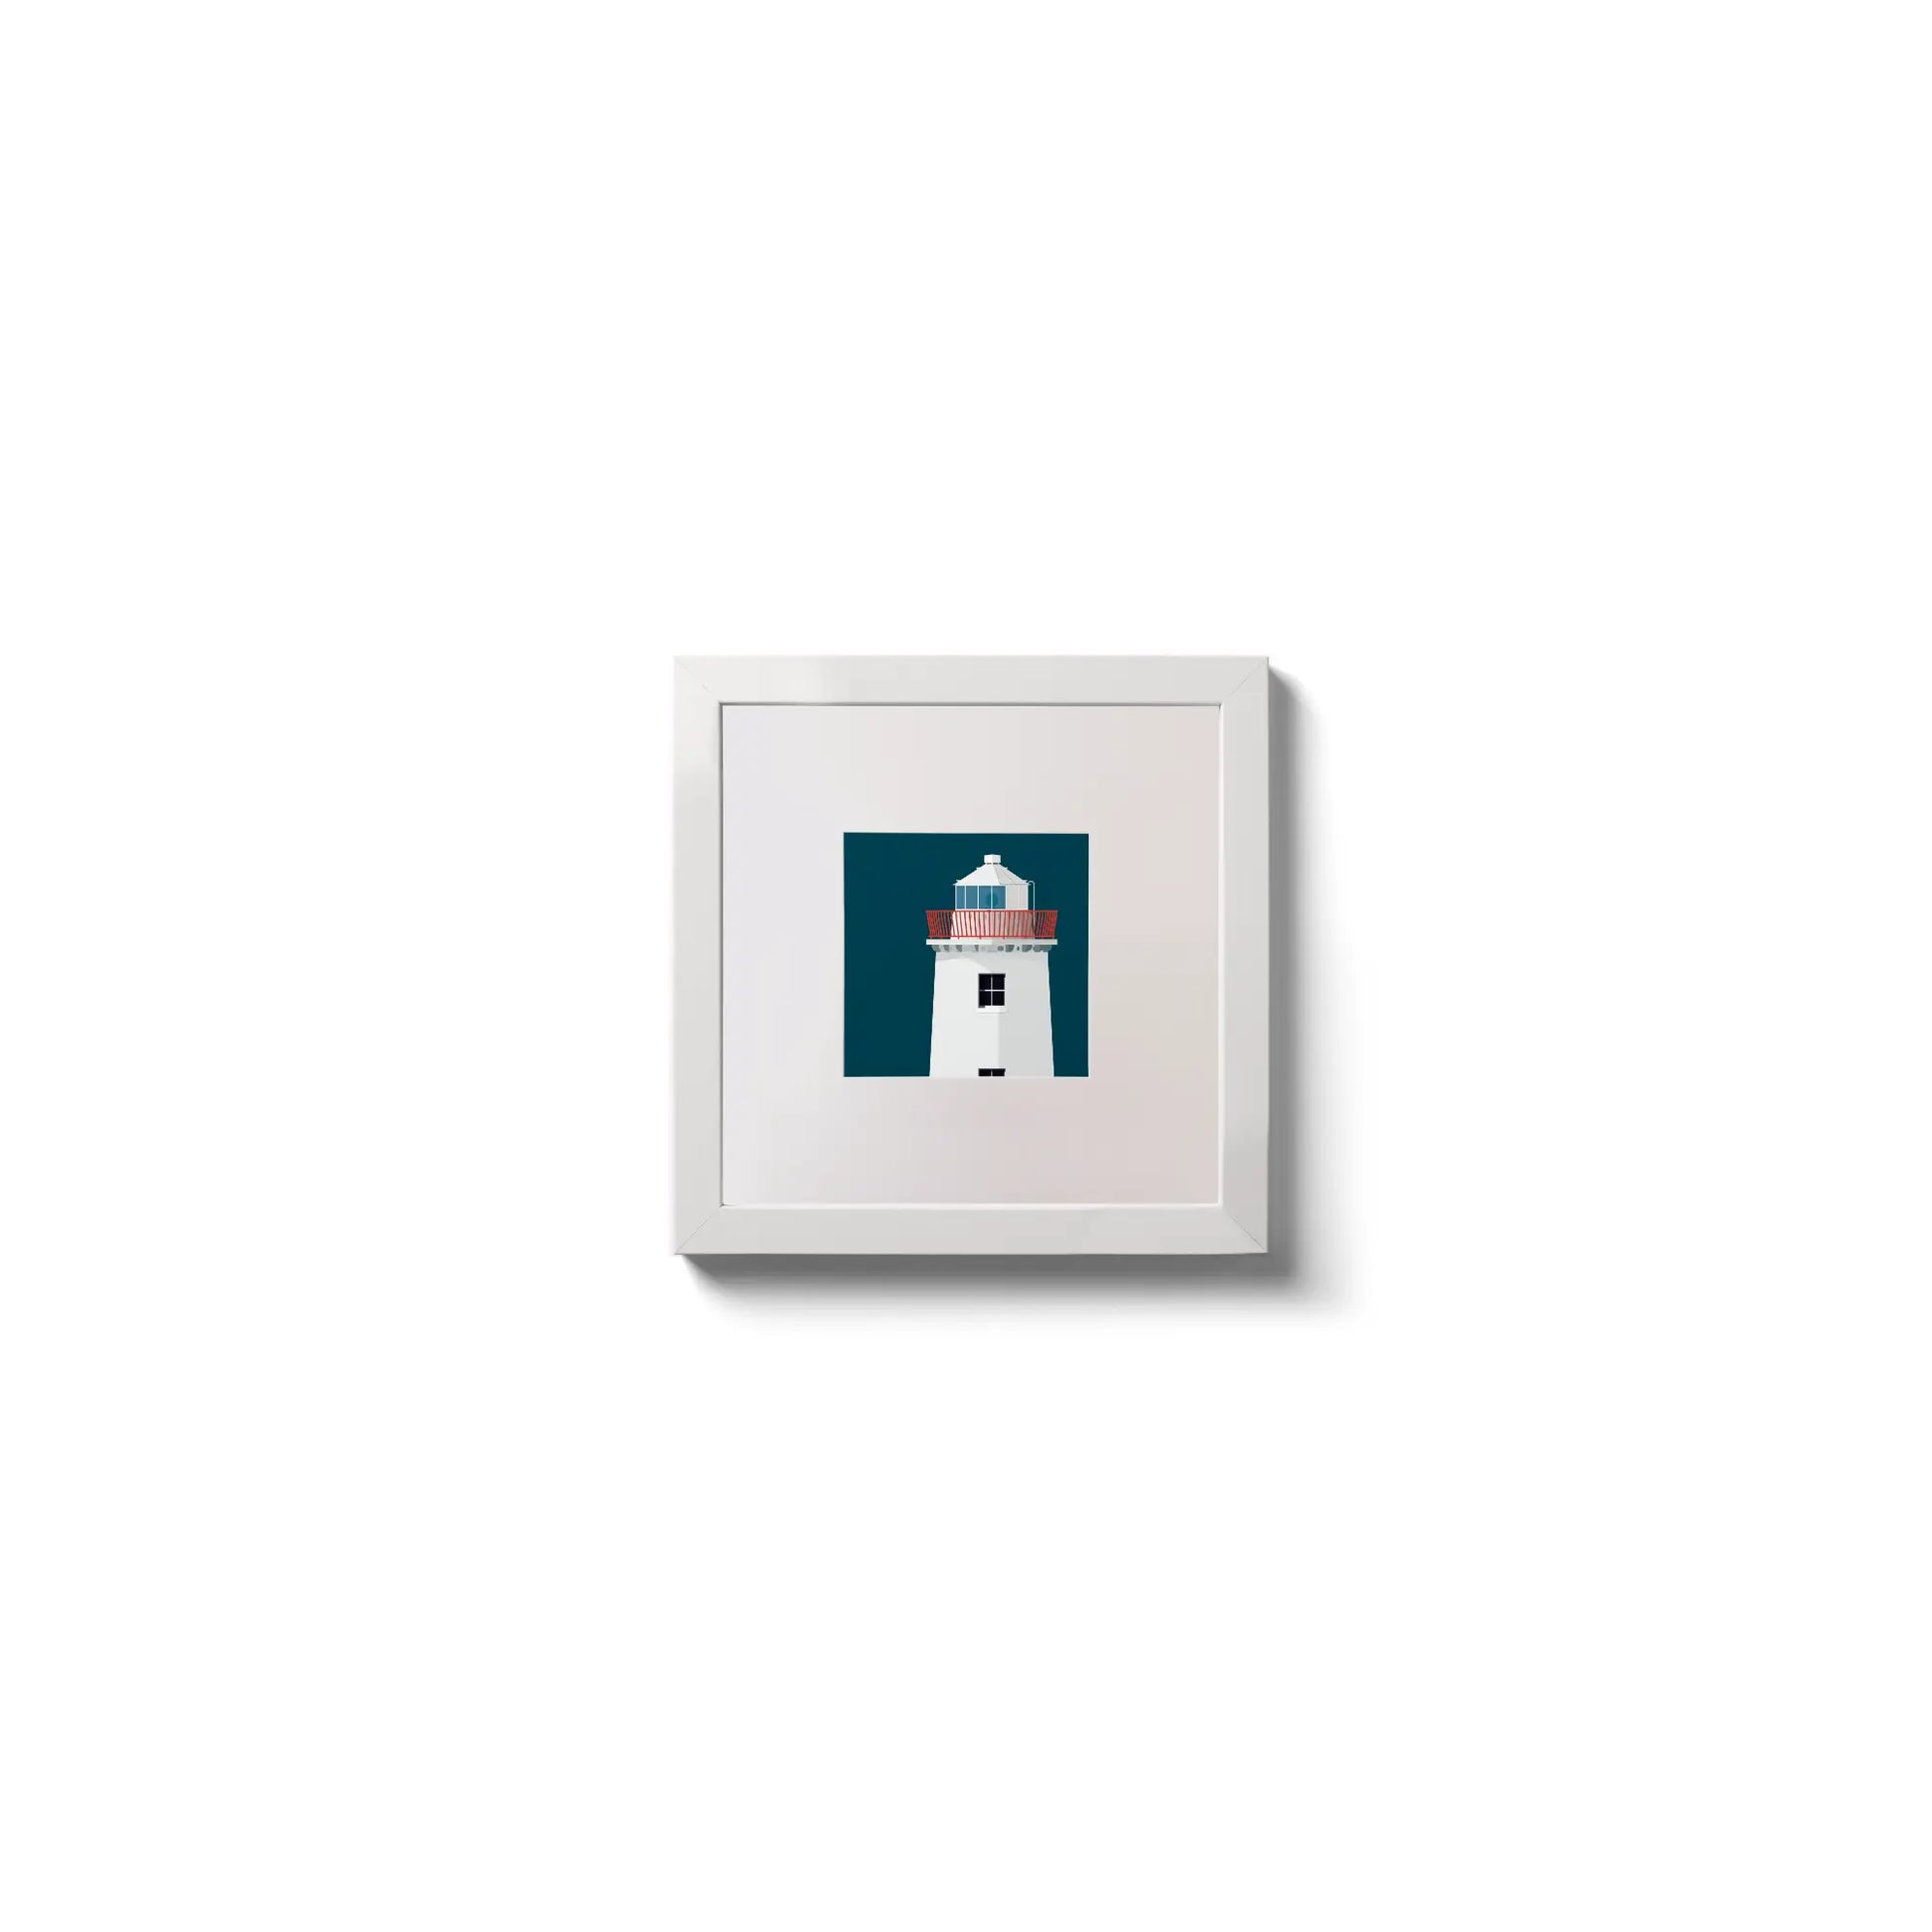 Illustration of Kilcredaun lighthouse on a midnight blue background,  in a white square frame measuring 10x10cm.